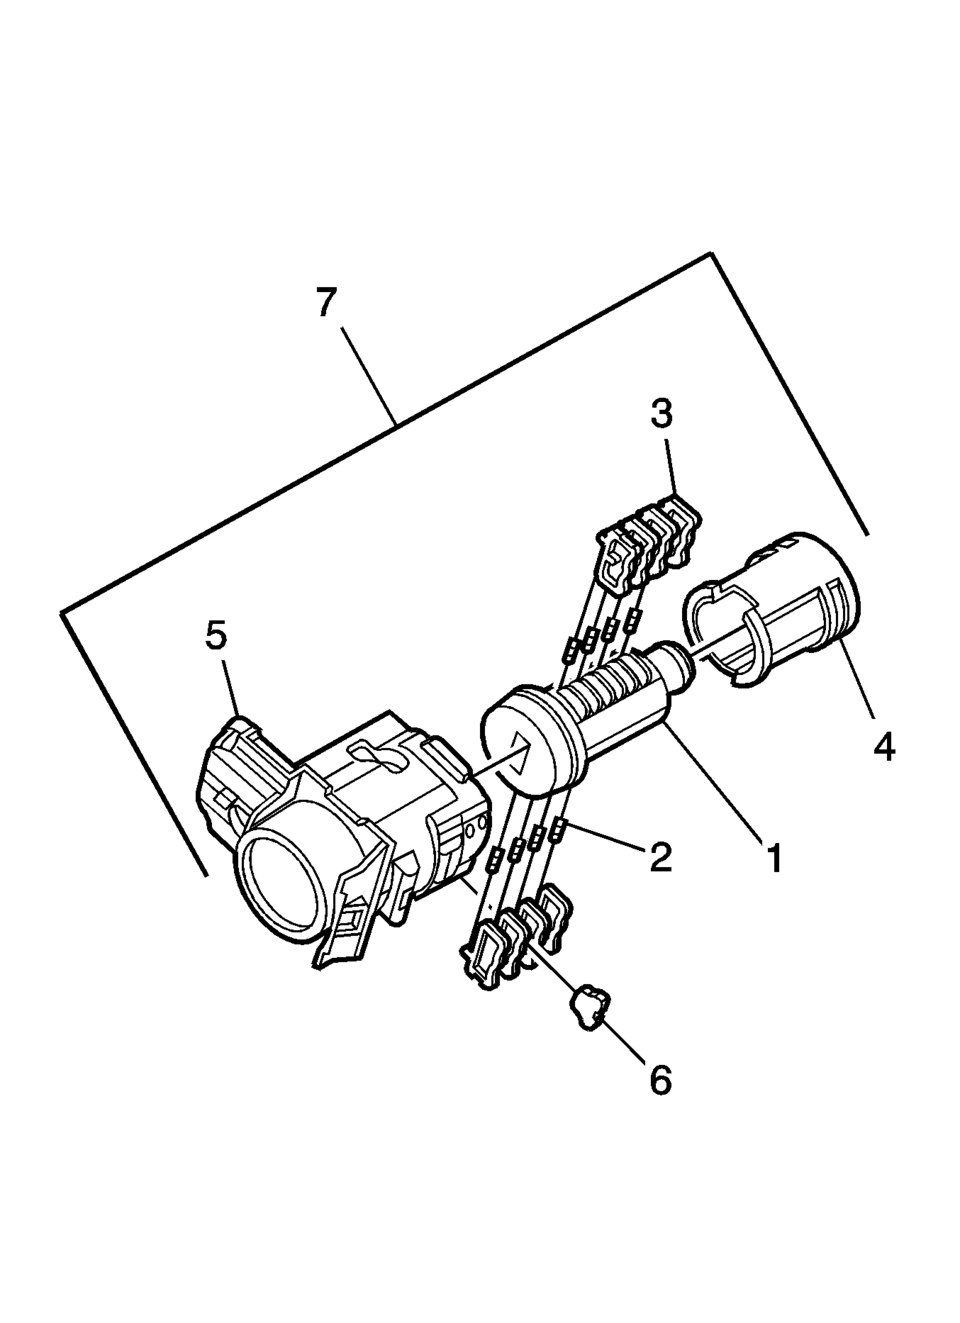 The door lock cylinder uses 8 of the 8 cut positions. The tumbler positions are